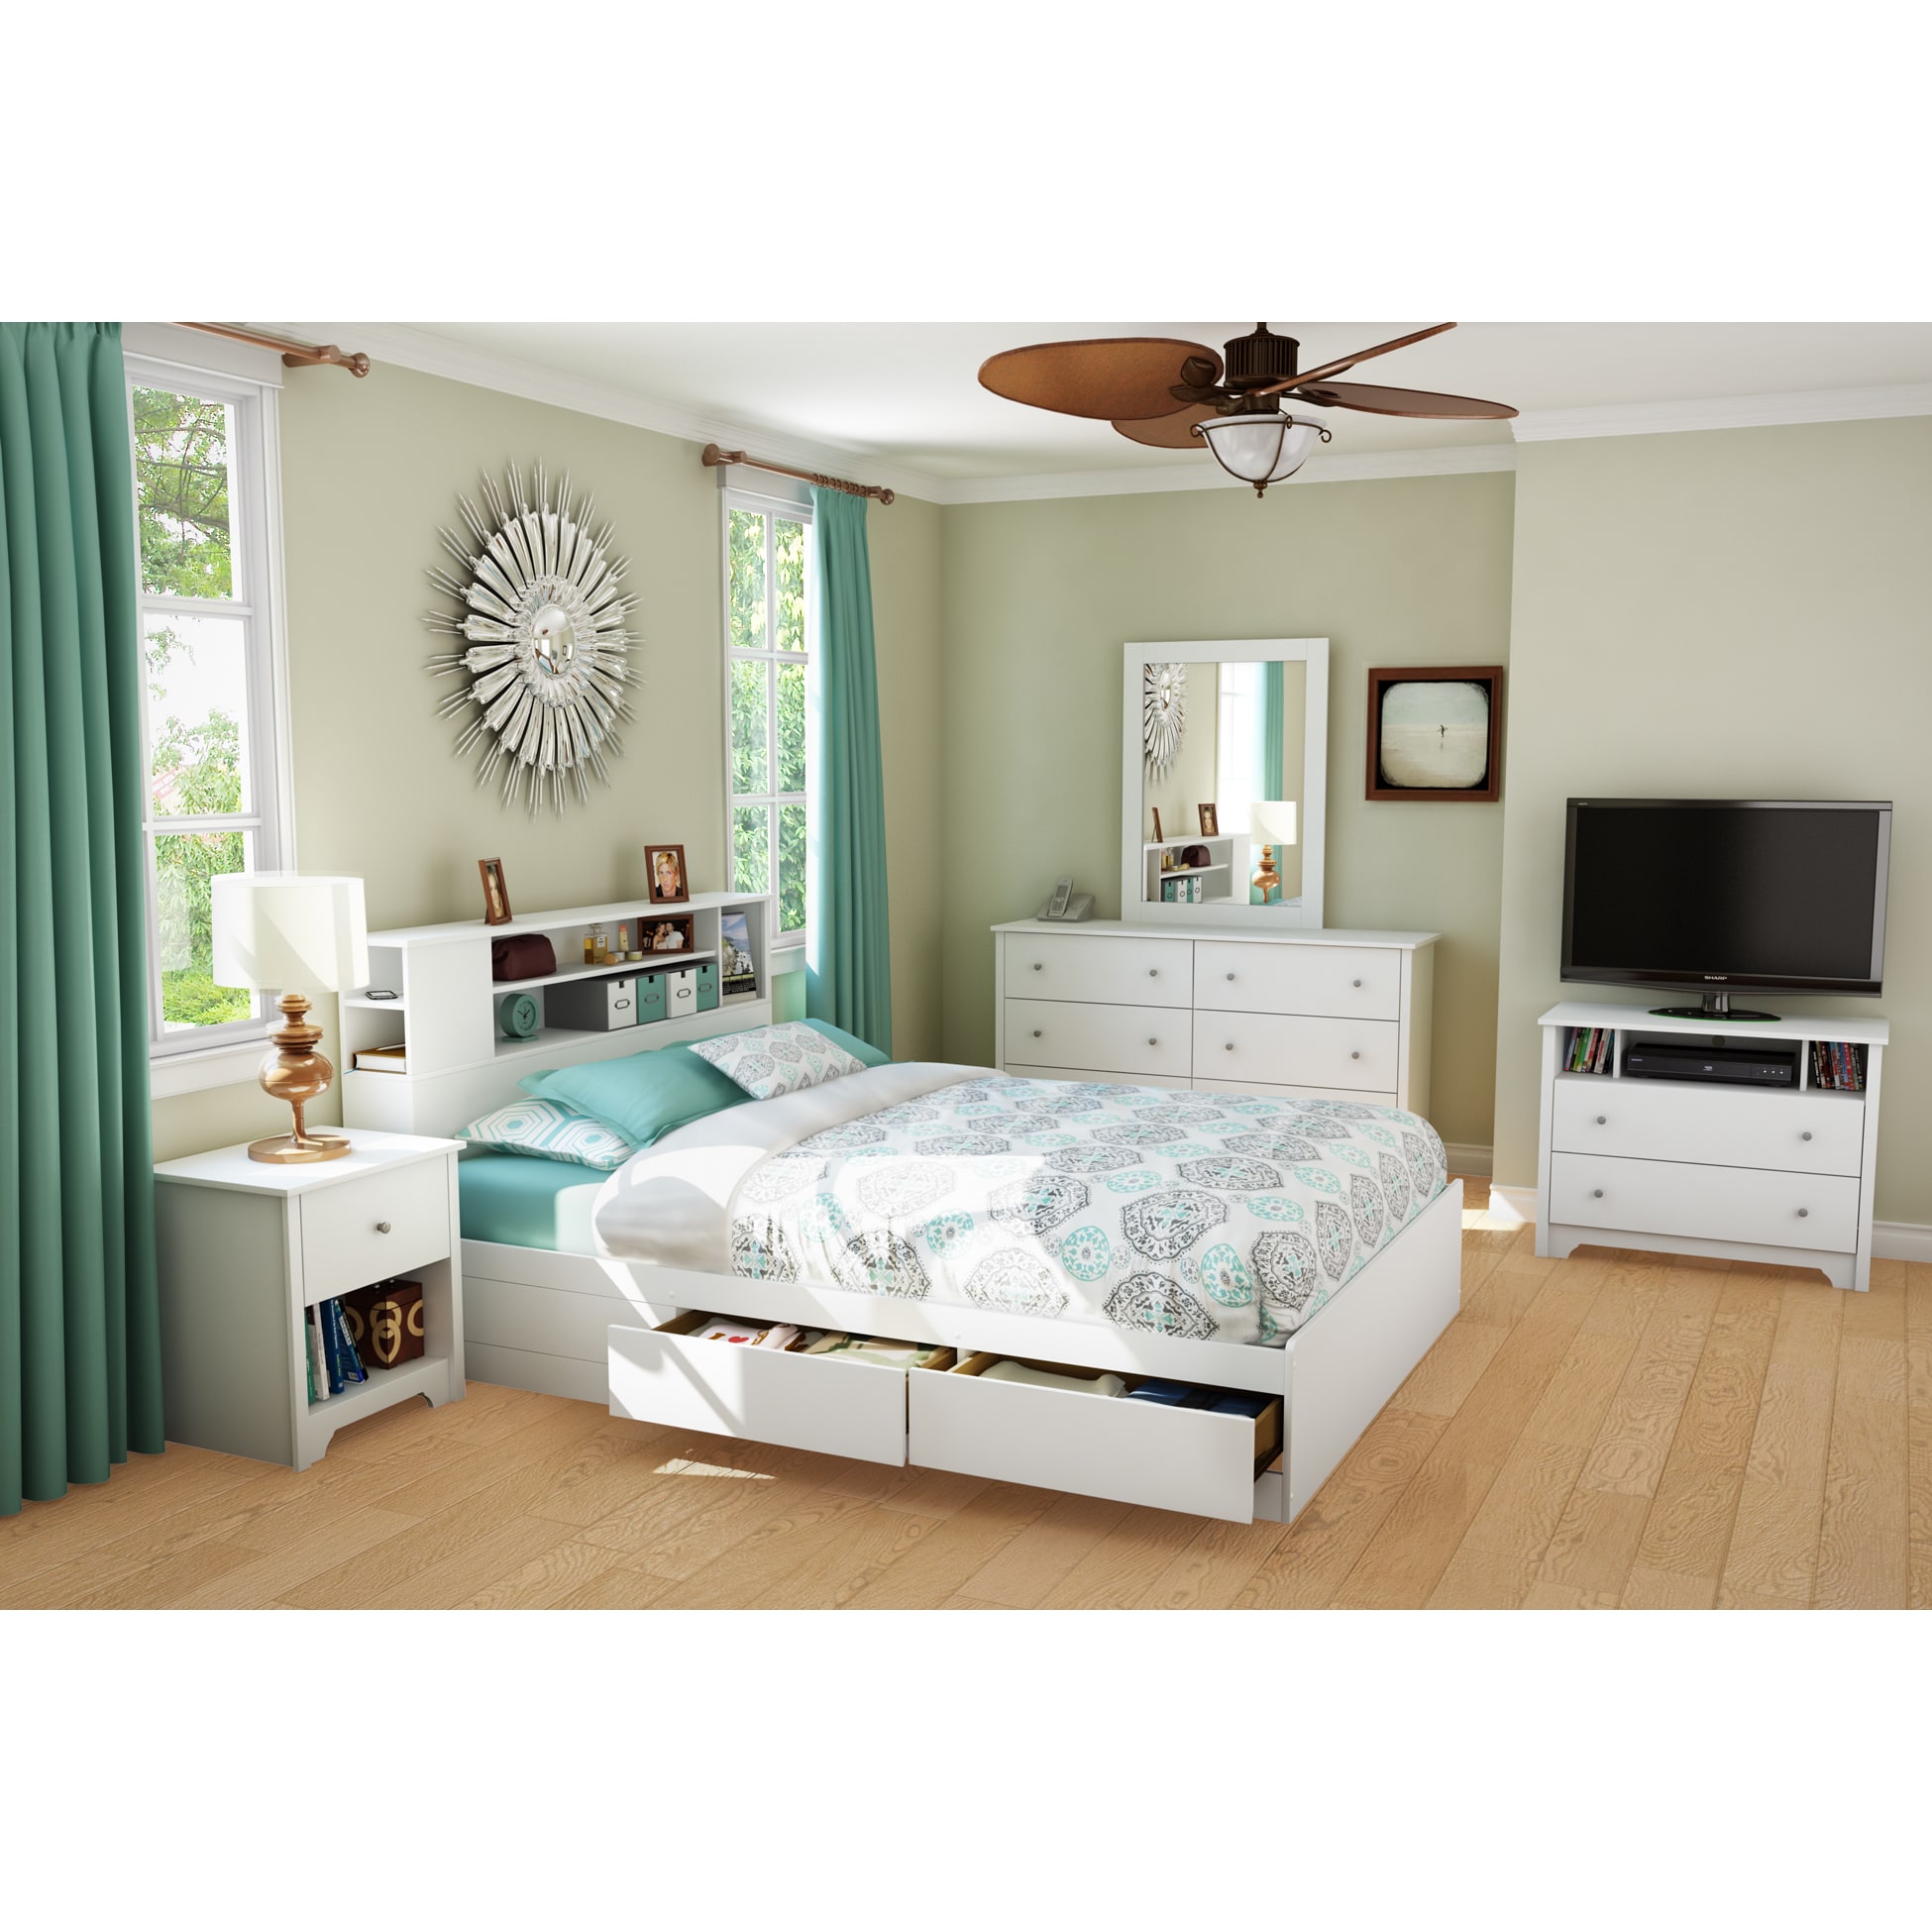 Shop South Shore Vito Queen Mates Bed Frame With Drawers And